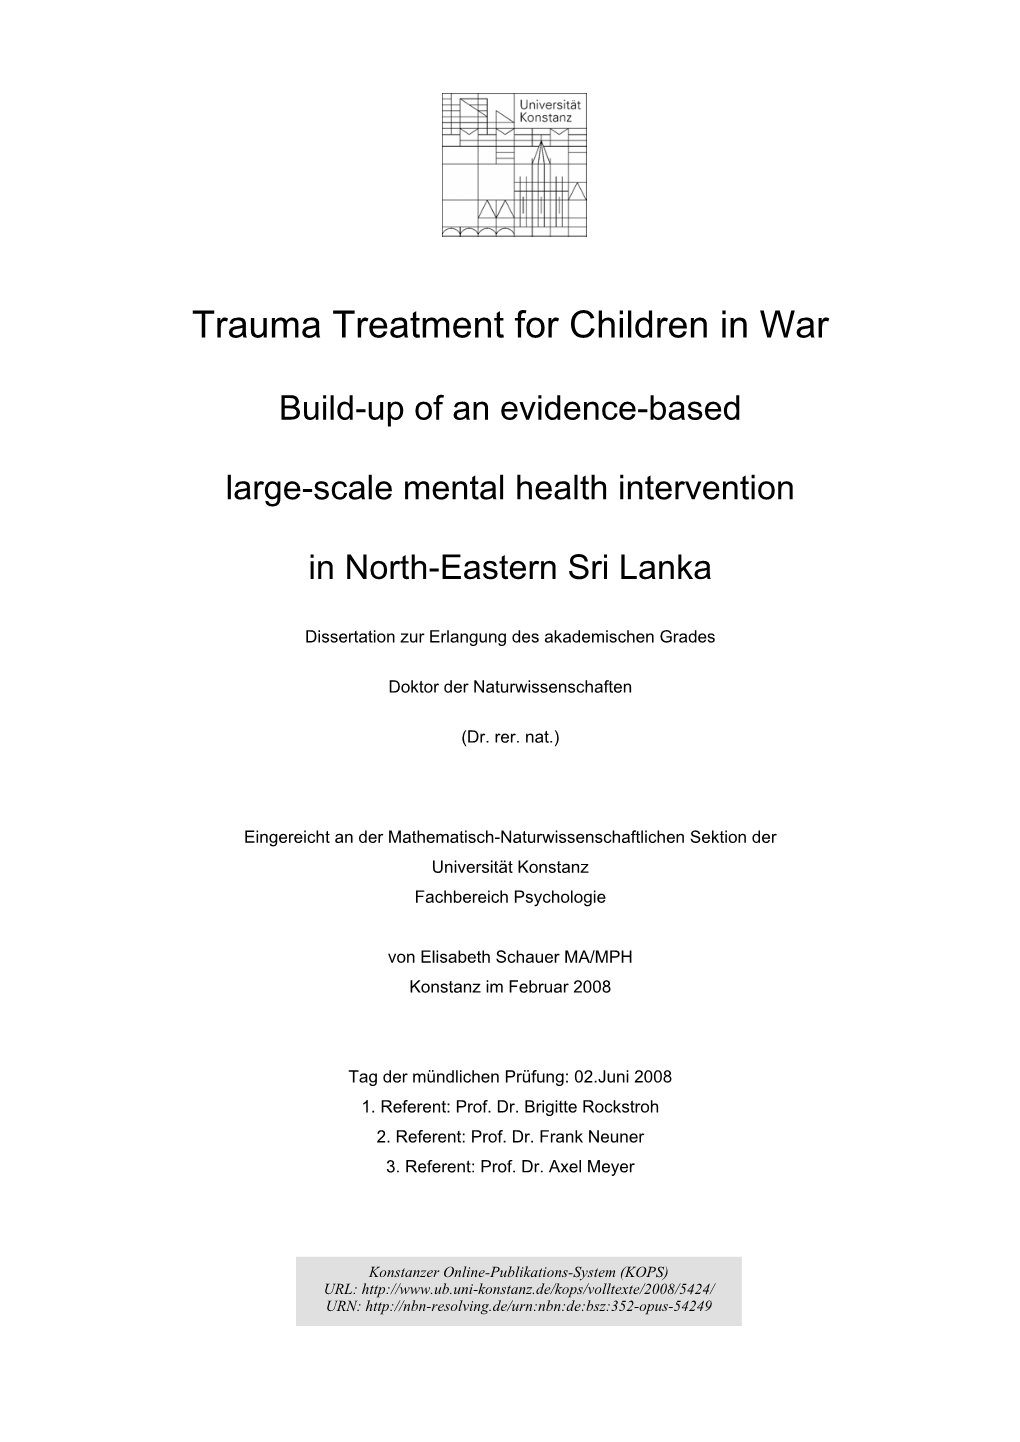 Trauma Treatment for Children in War : Build-Up of an Evidence-Based